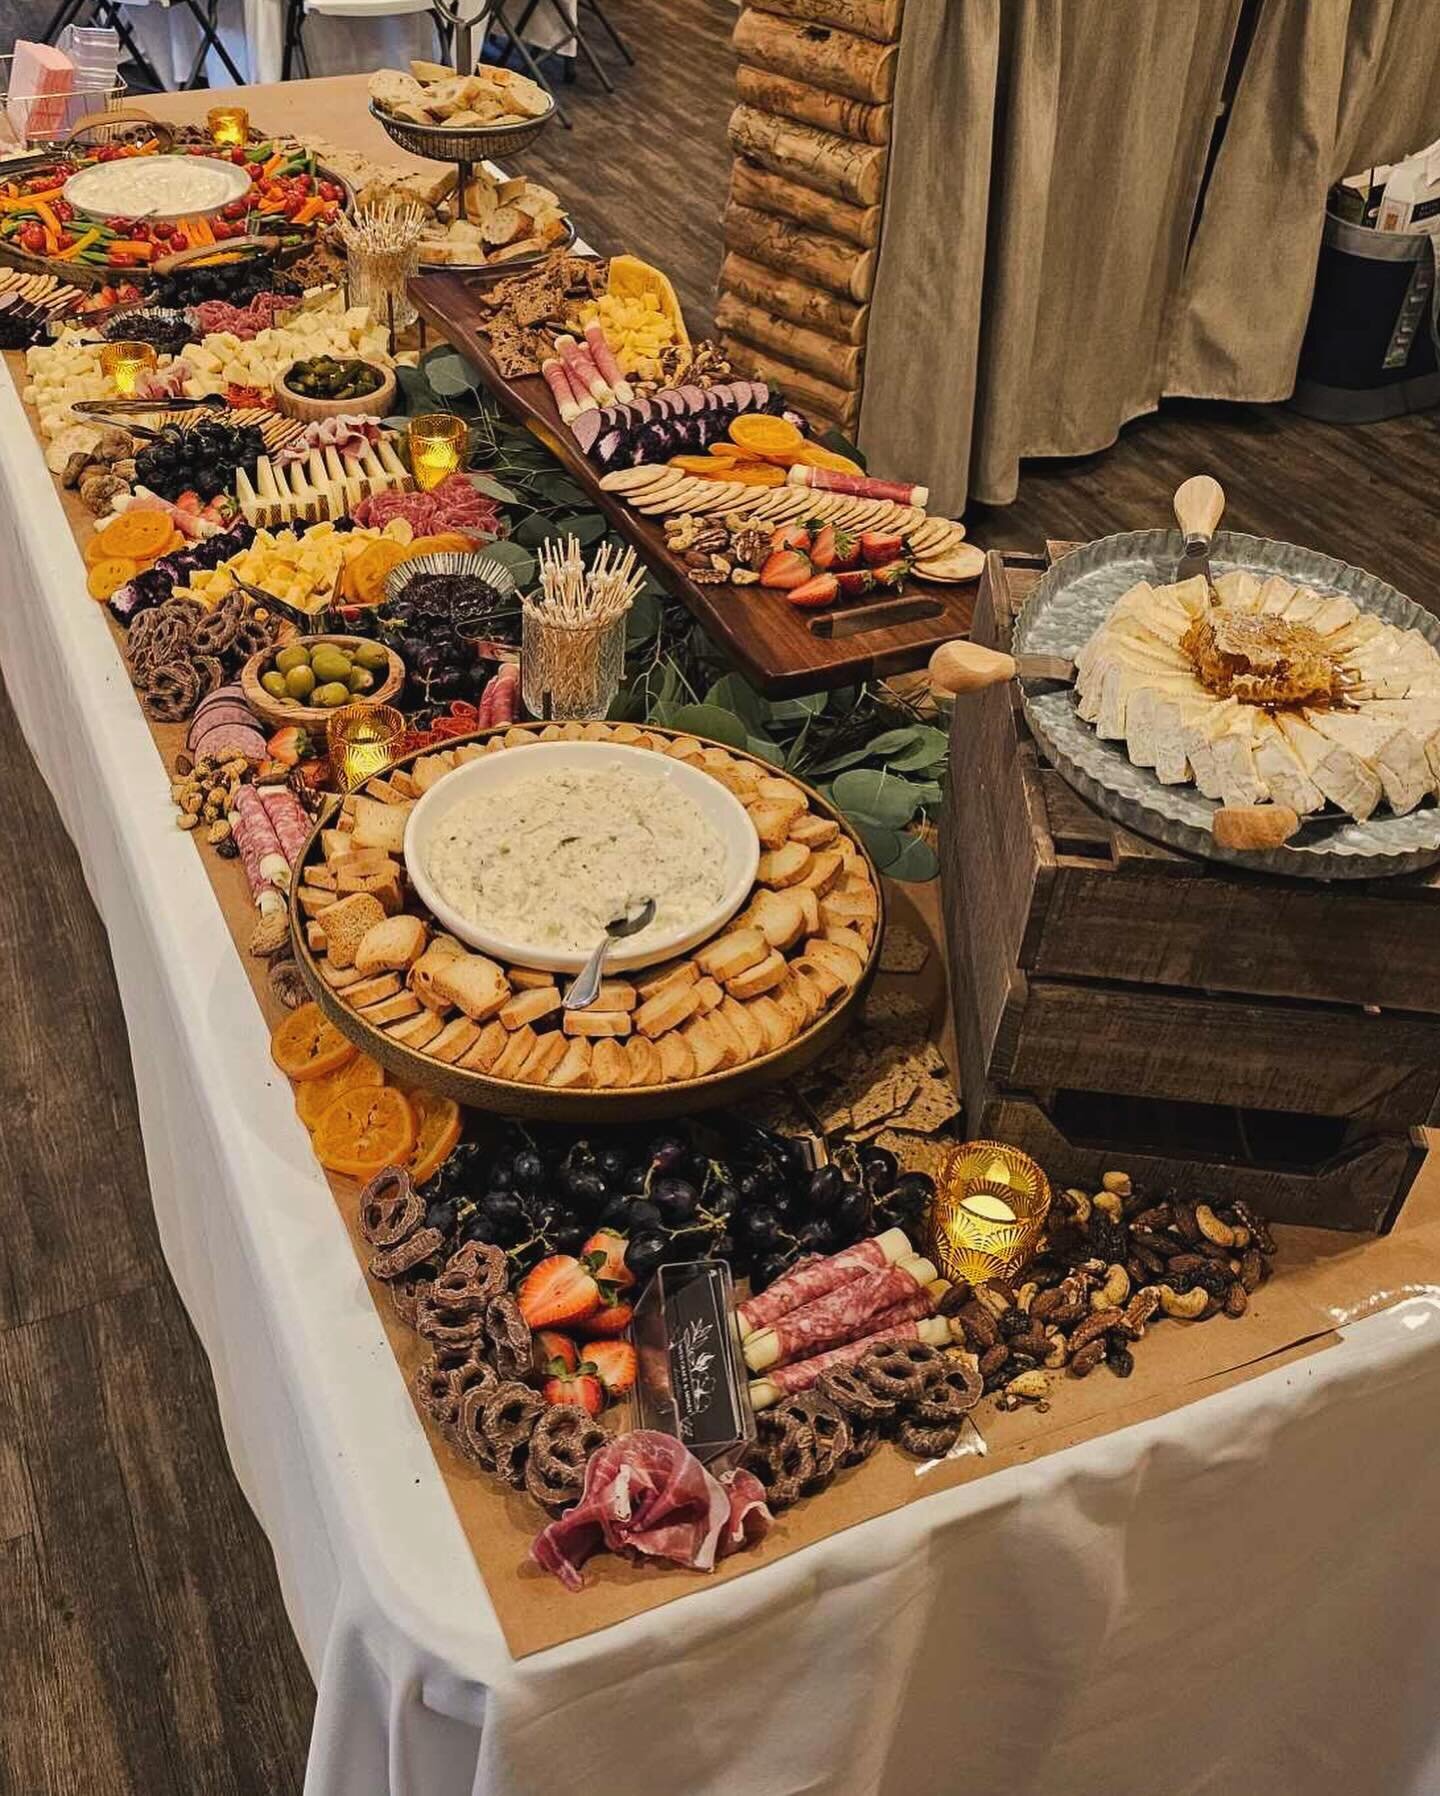 I&rsquo;m a little biased, but doesn&rsquo;t this look so yummy? 😍🤤

I absolutely love doing wedding receptions, since my husband always joins me &amp; we always have so much fun! ❤️

#utahcharcuterie #utahgrazingtable #utahcountycharcuterie #utahc